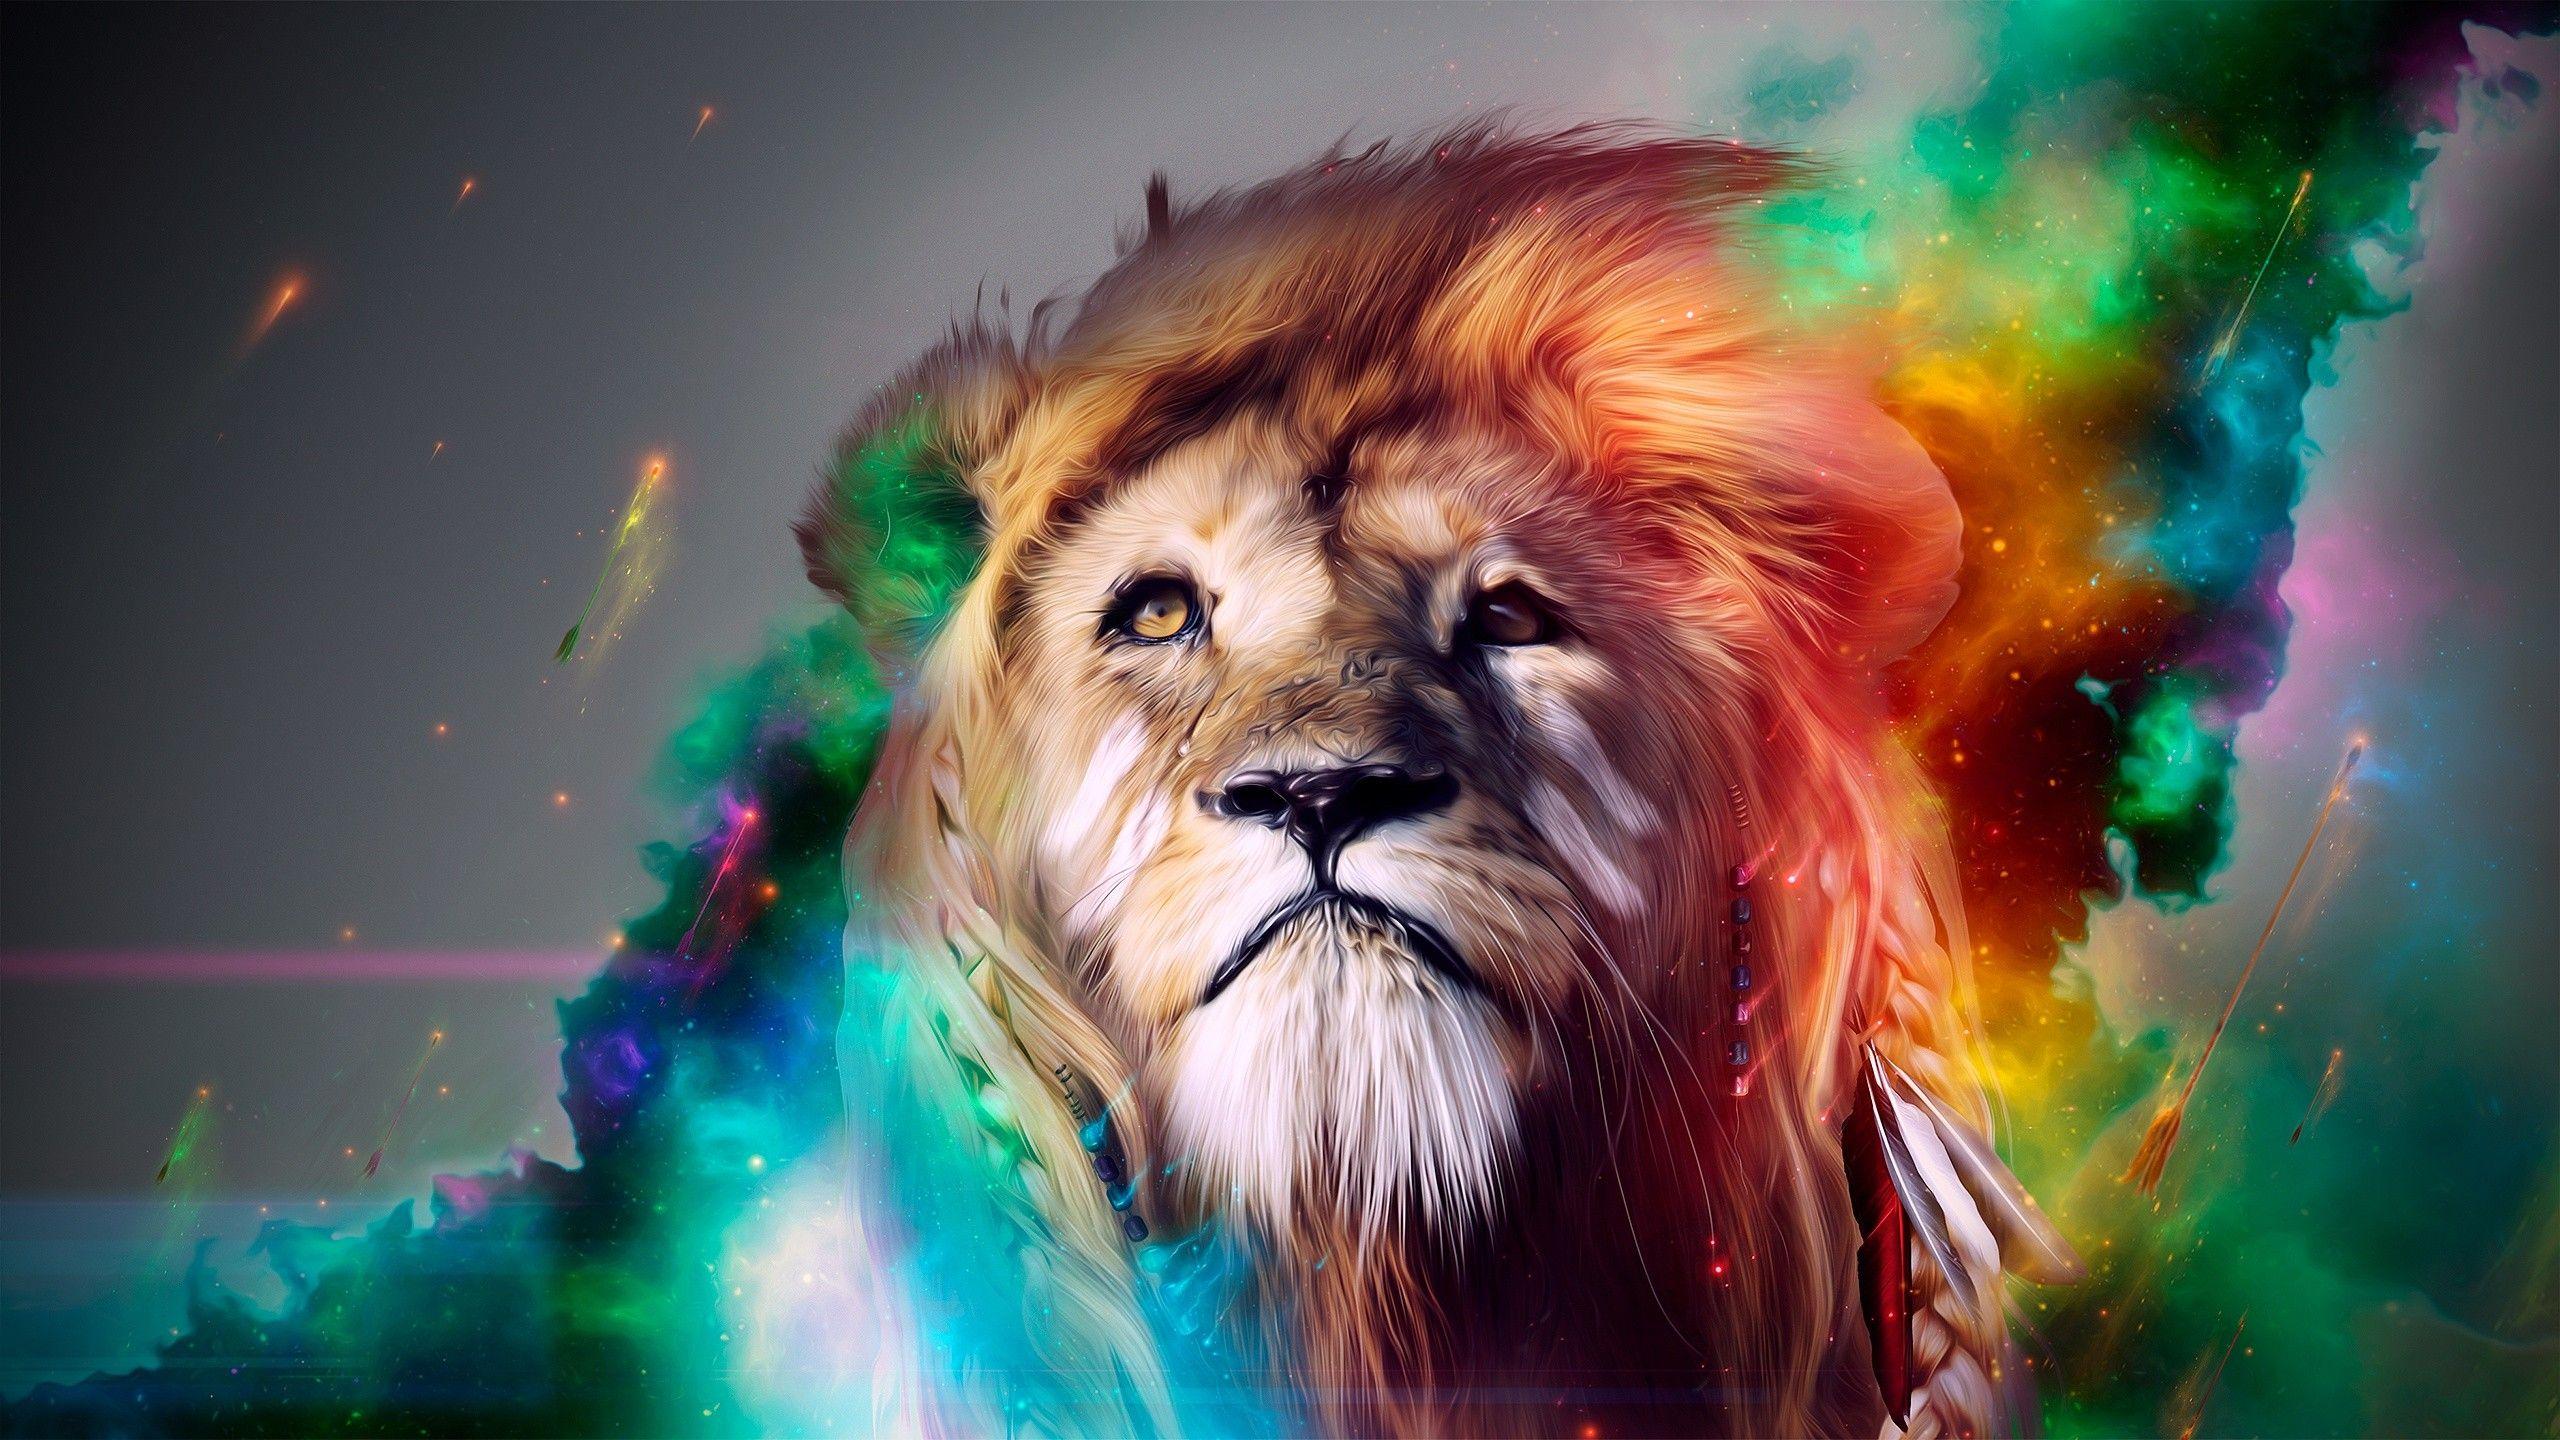 Cool Lion Wallpapers - Top Free Cool Lion Backgrounds - WallpaperAccess